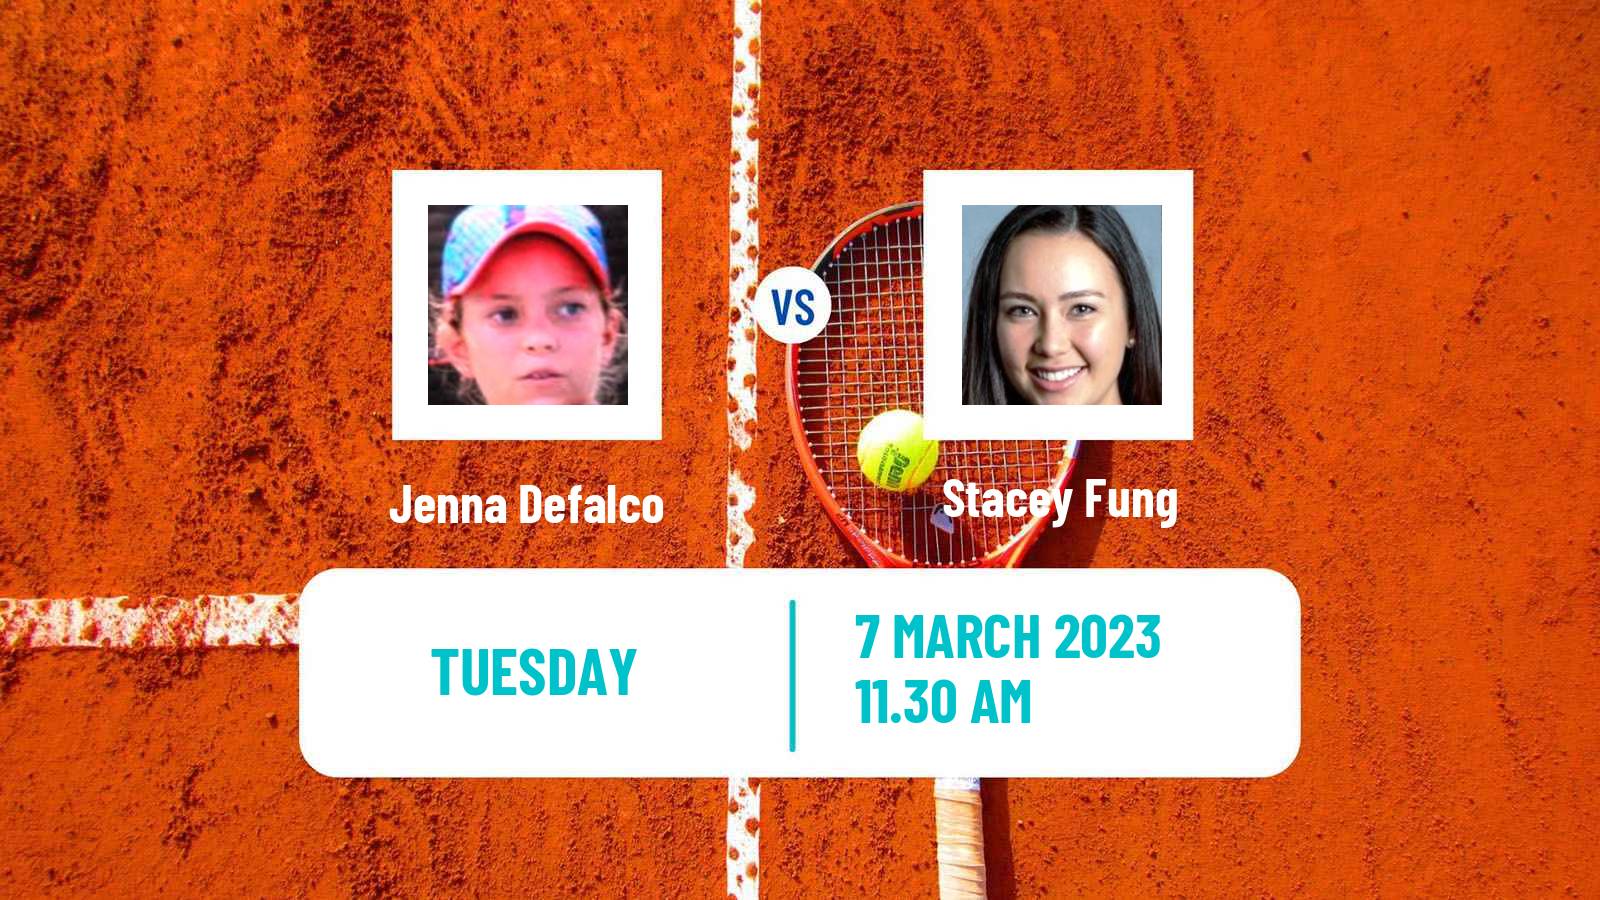 Tennis ITF Tournaments Jenna Defalco - Stacey Fung